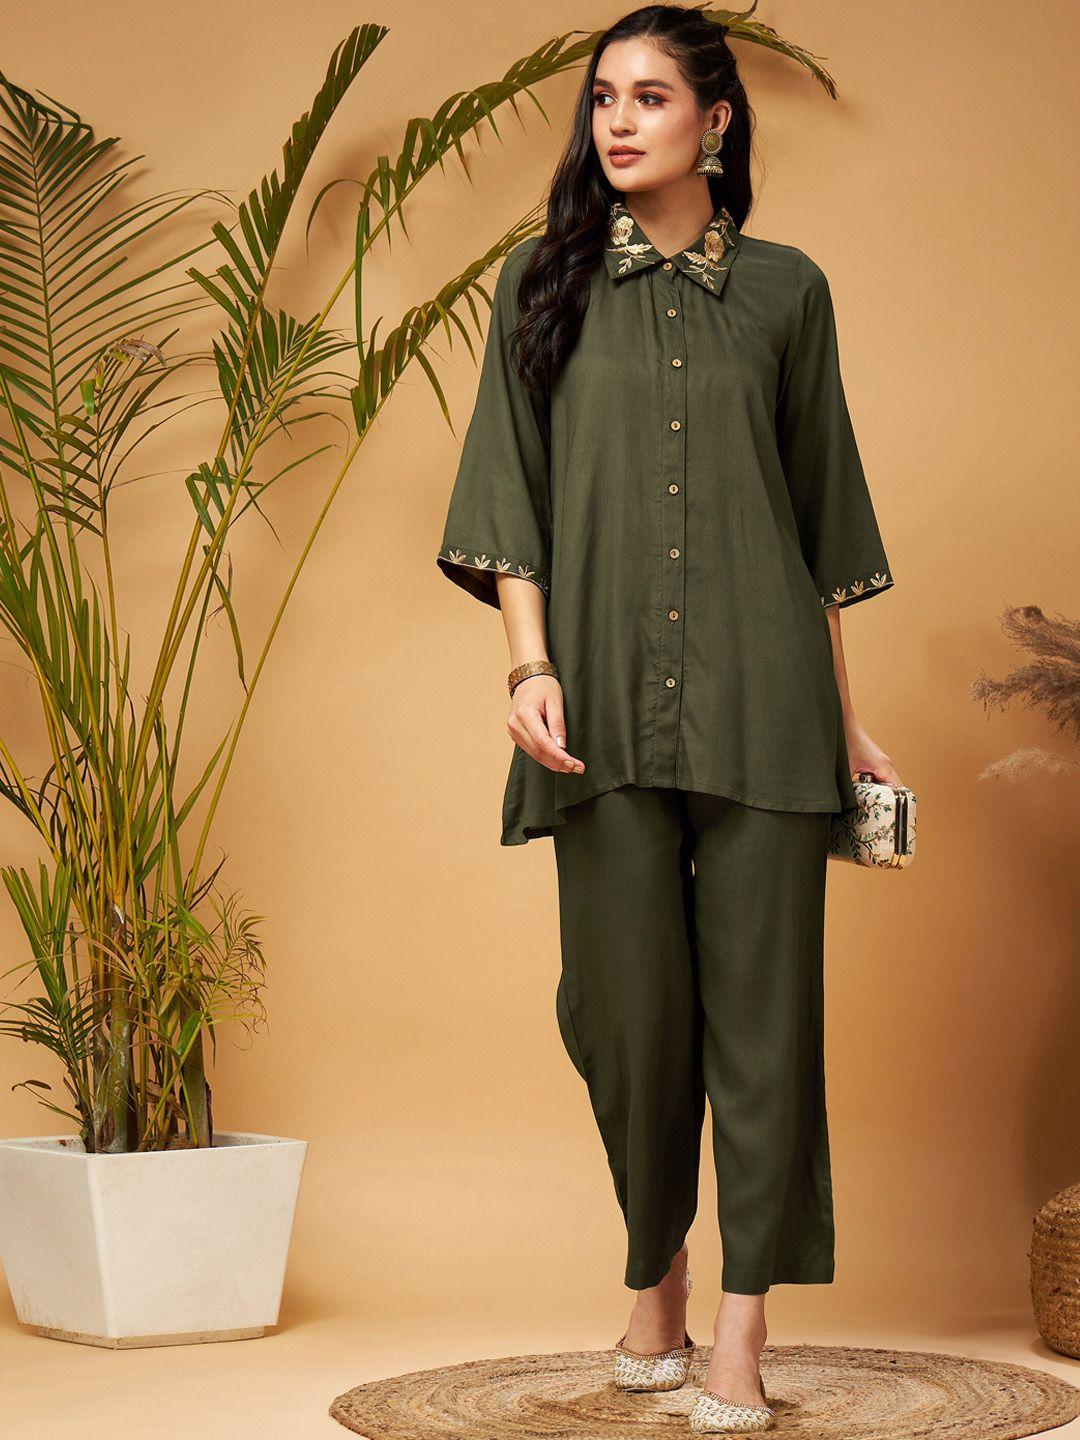 shae-by-sassafras-zari-embroidered-shirt-collar-tunic-top-with-palazzos-co-ords